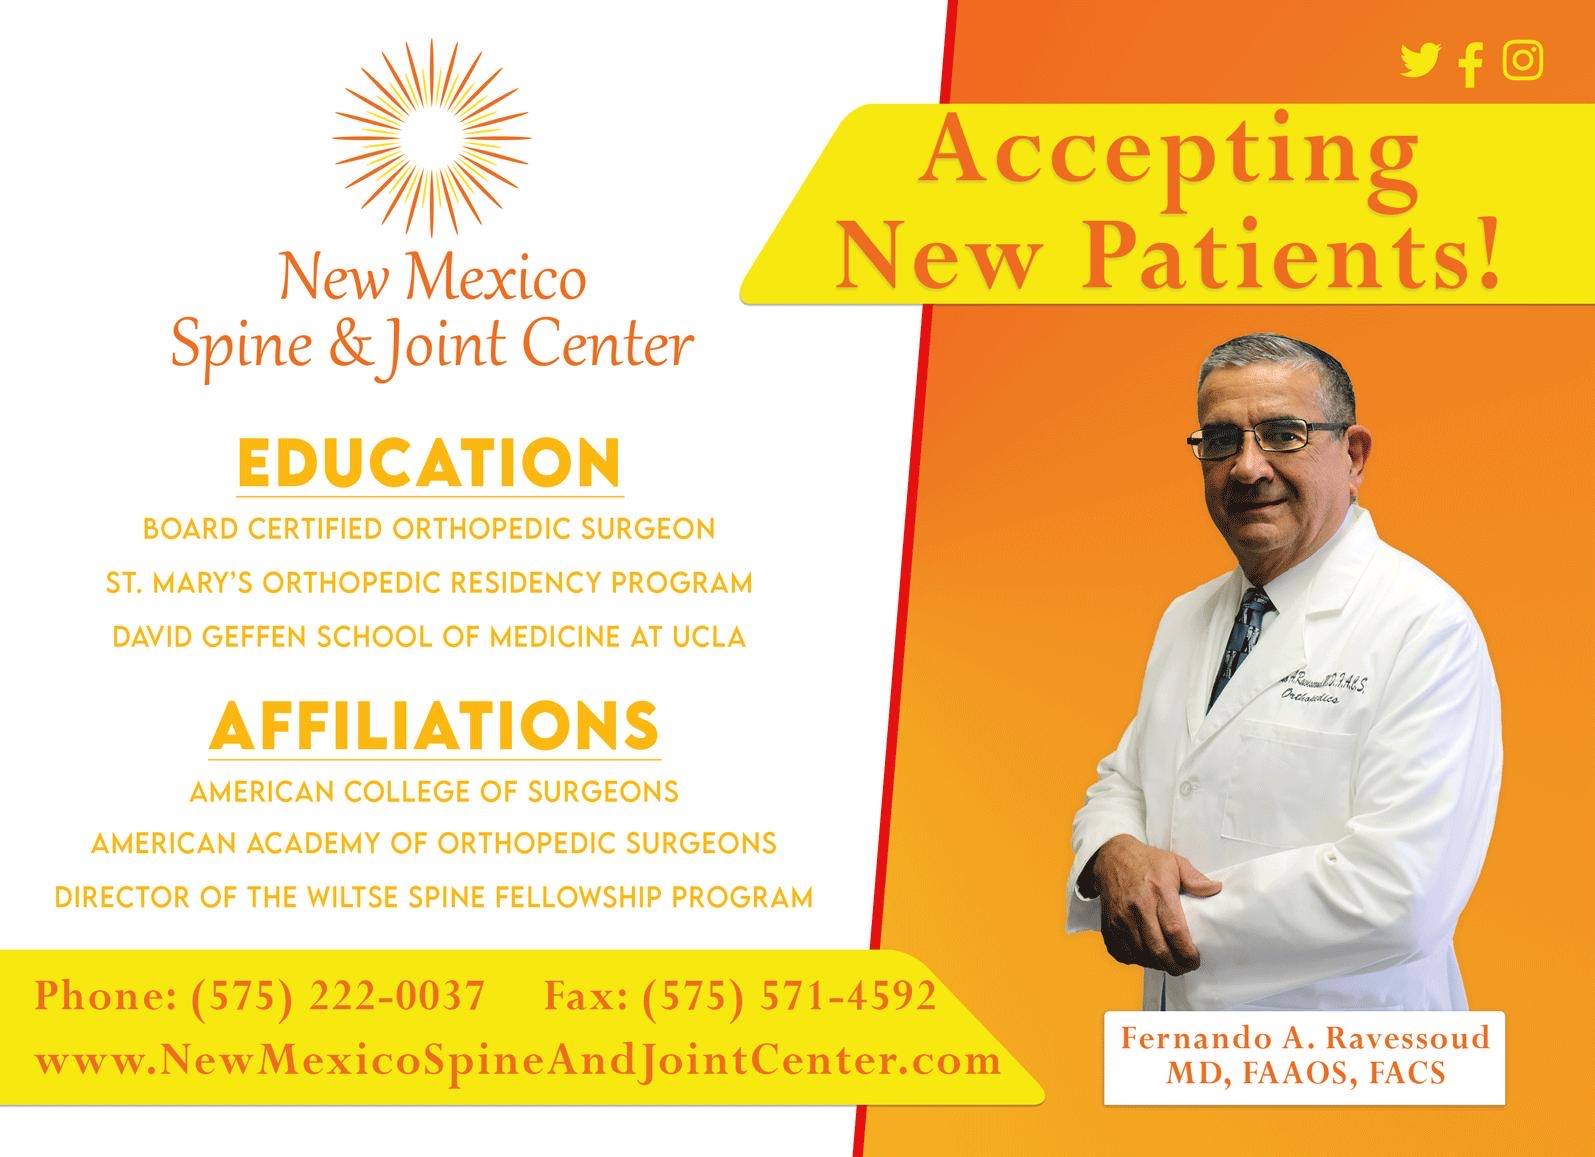 Dr. Fernando Ravessoud - New Mexico Spine and Joint Center Las Cruces